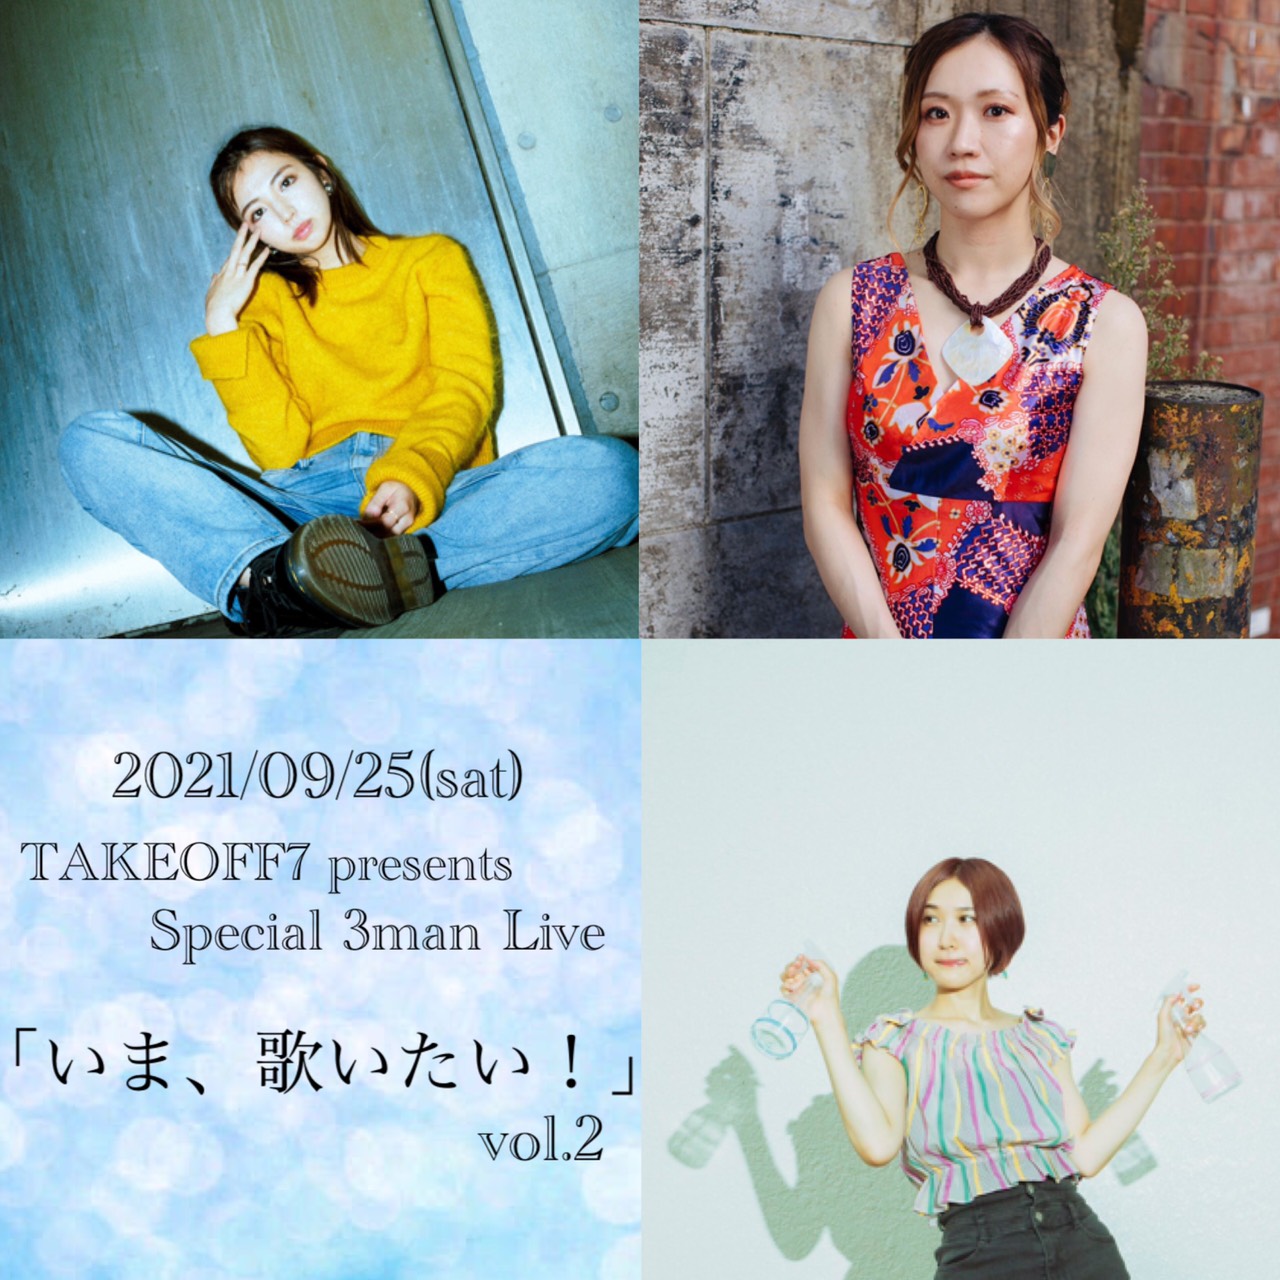 TAKEOFF7 presents Special 3man Live 「いま、歌いたい！」vol.2